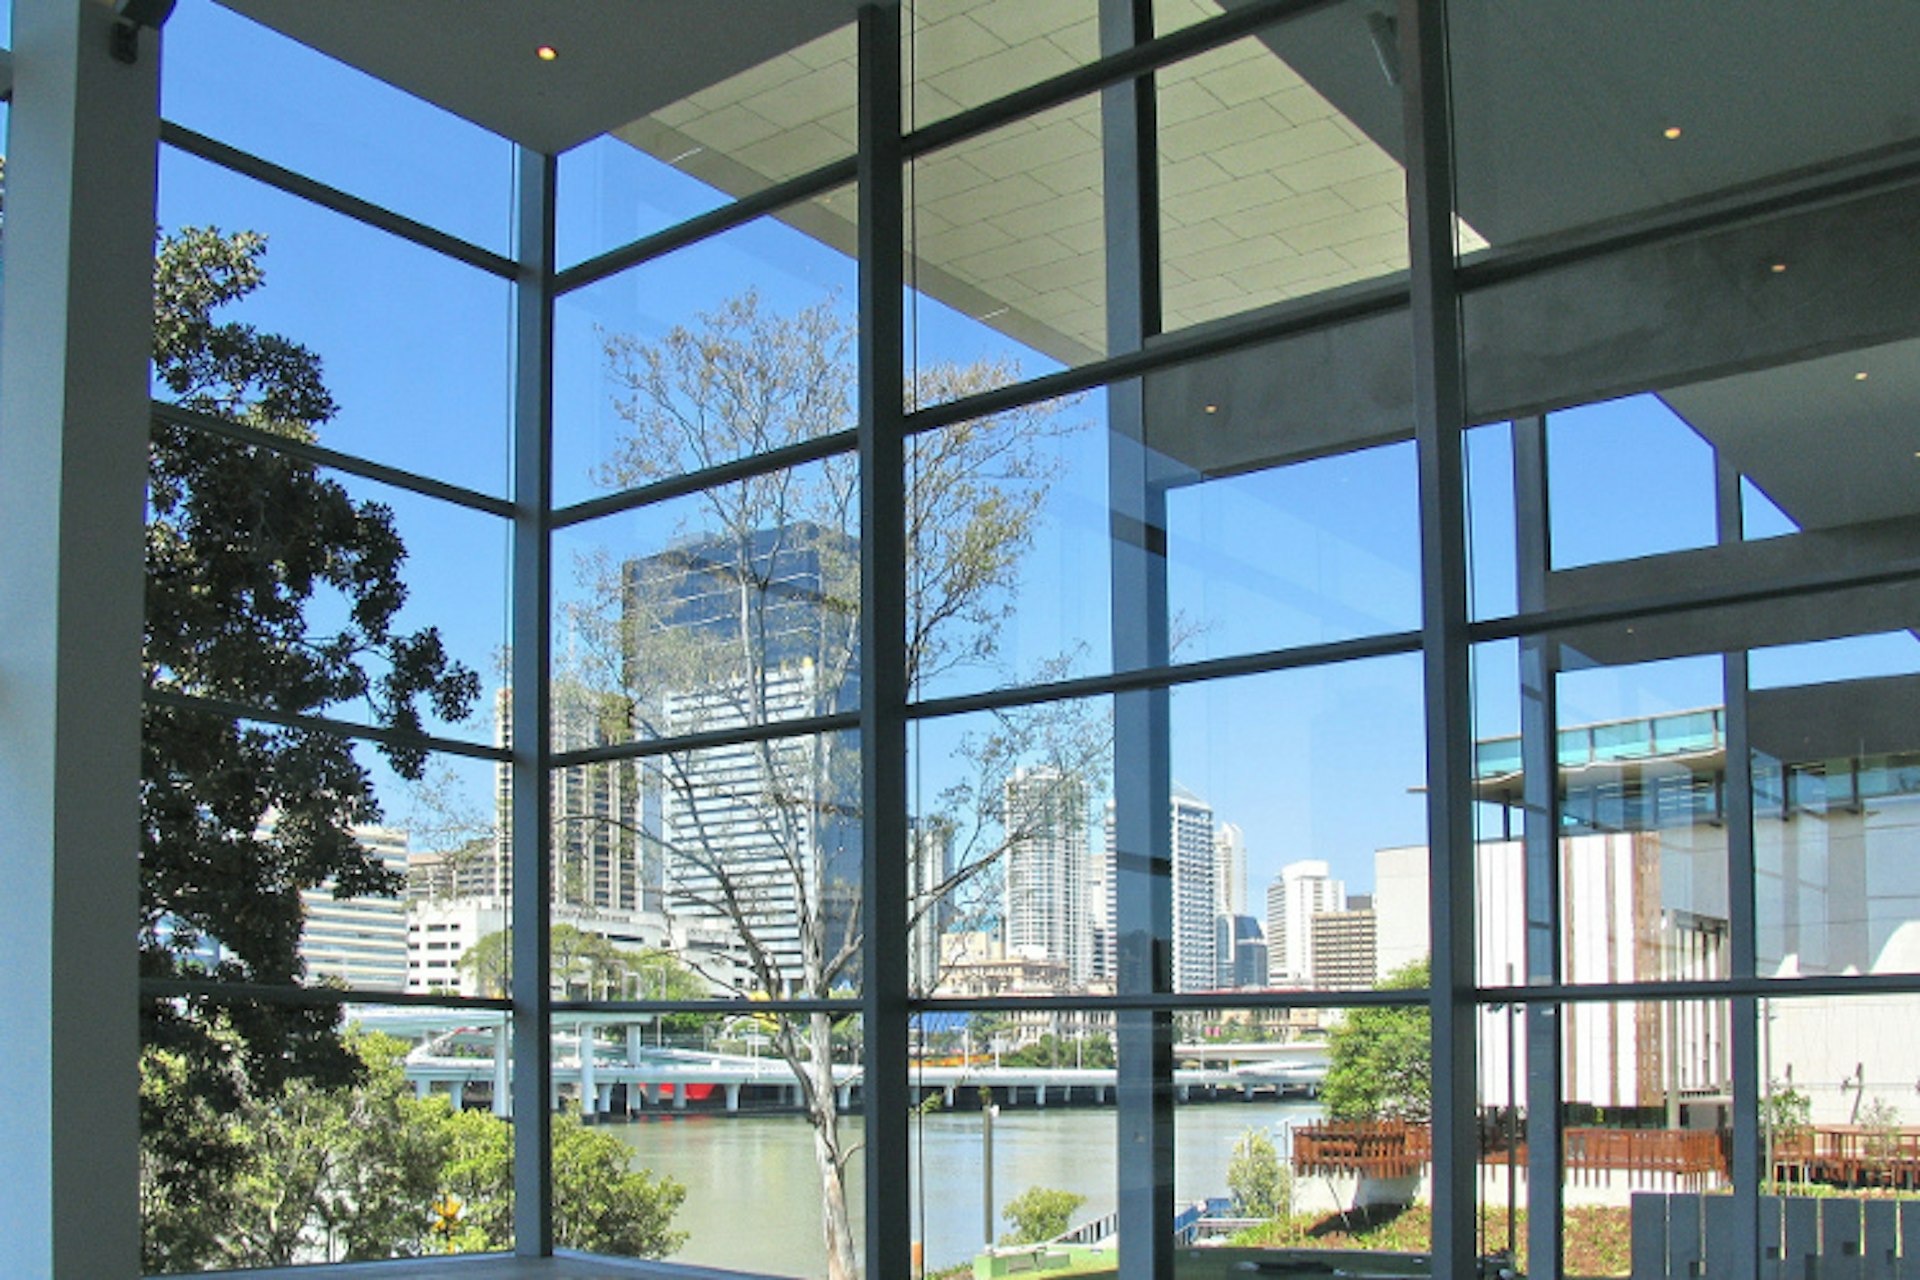 Big Brisbane views from the Queensland Art Gallery (GOMA). Image by Bert Knottenbeld / CC BY SA 2.0